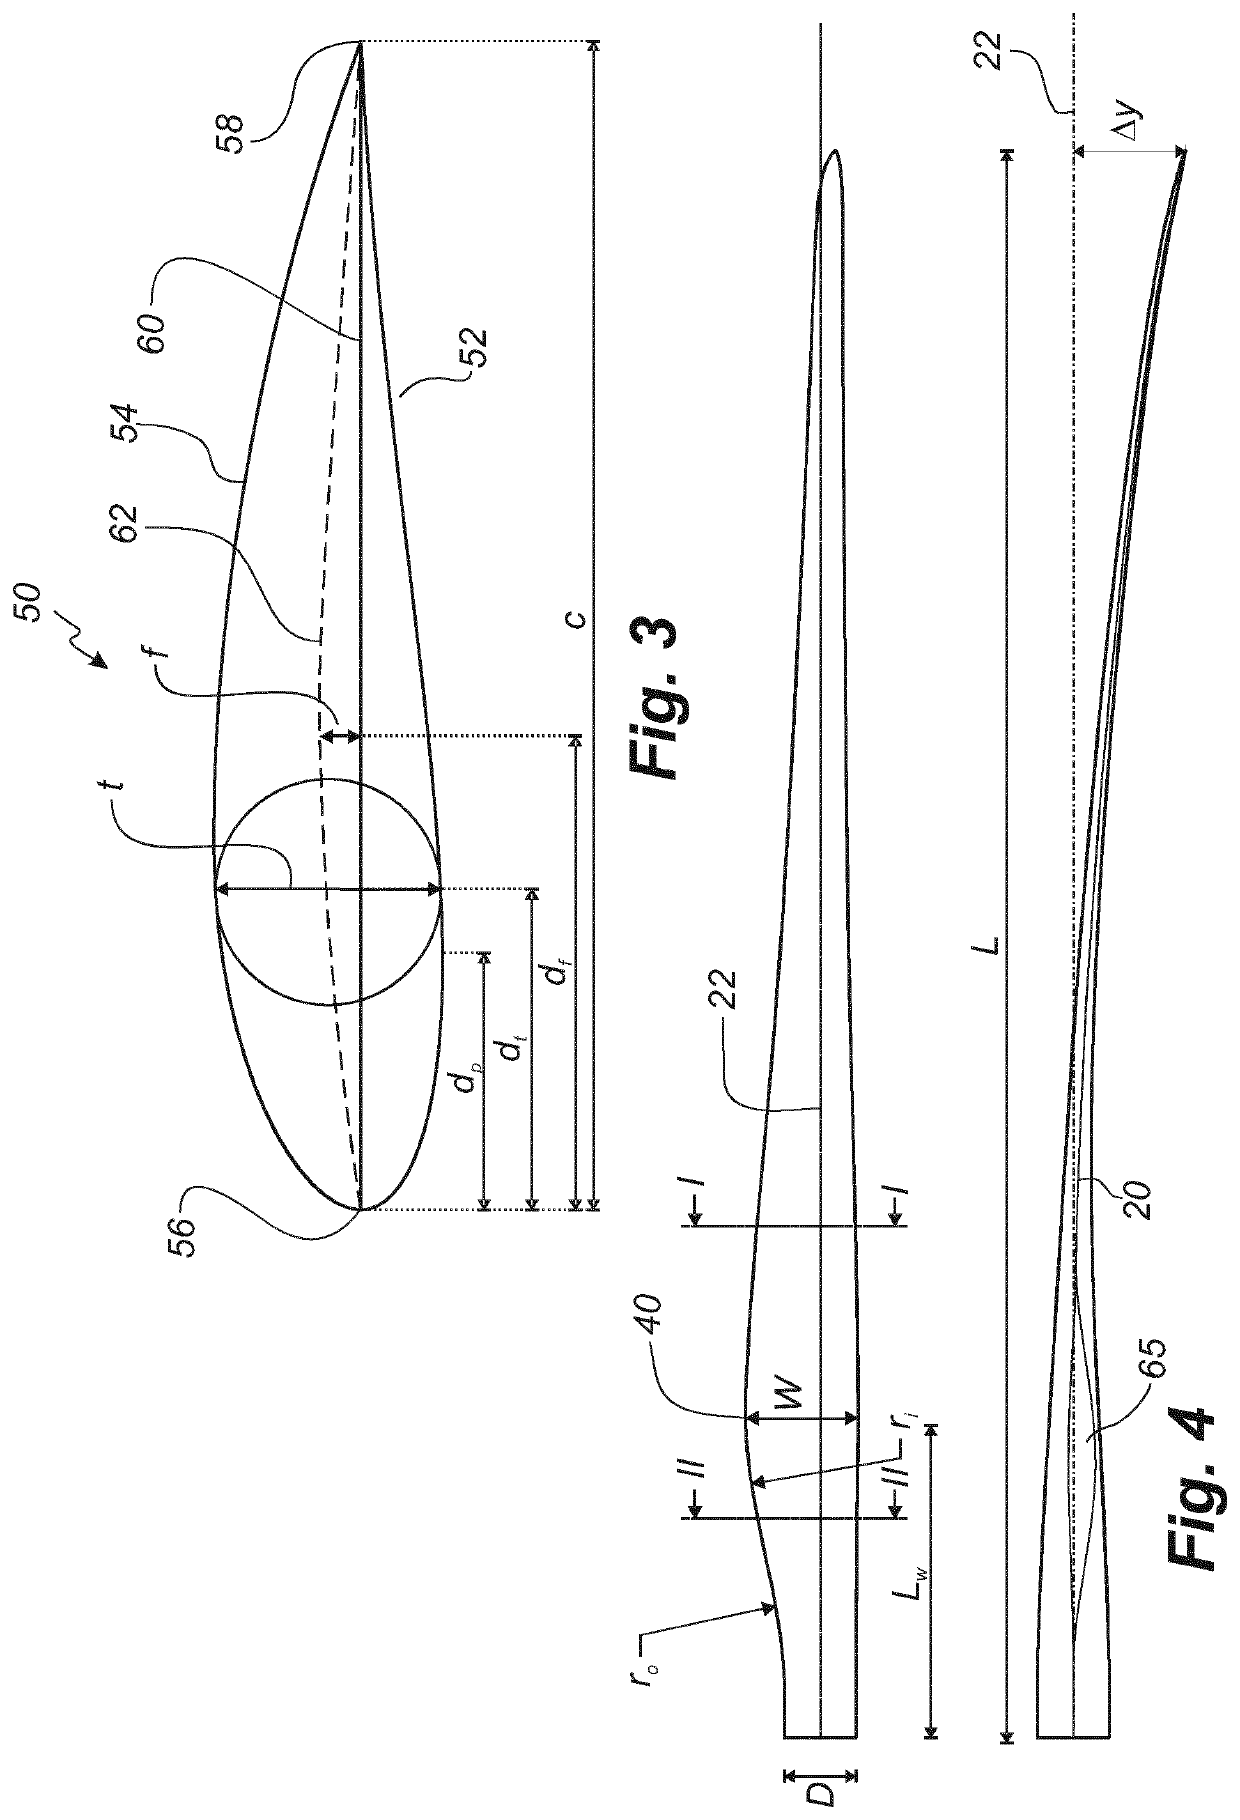 Wind turbine blade with a trailing edge spacing section